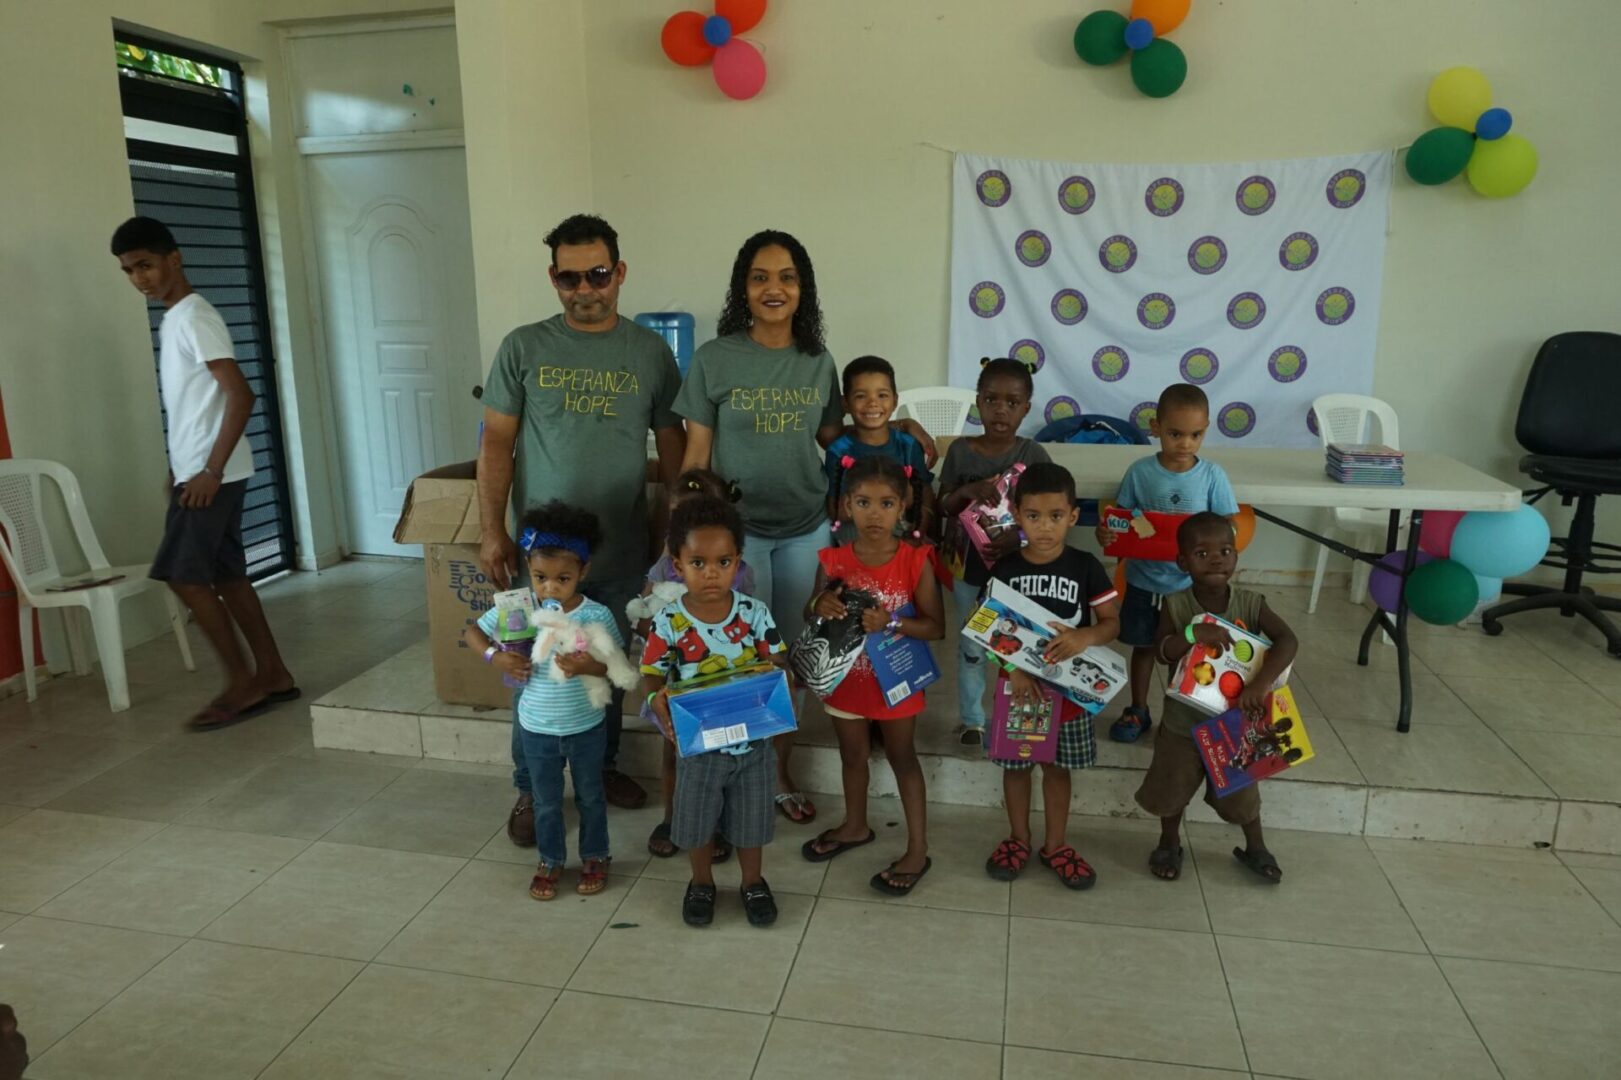 A male and female staff together with the group of young girls and boys who received toys